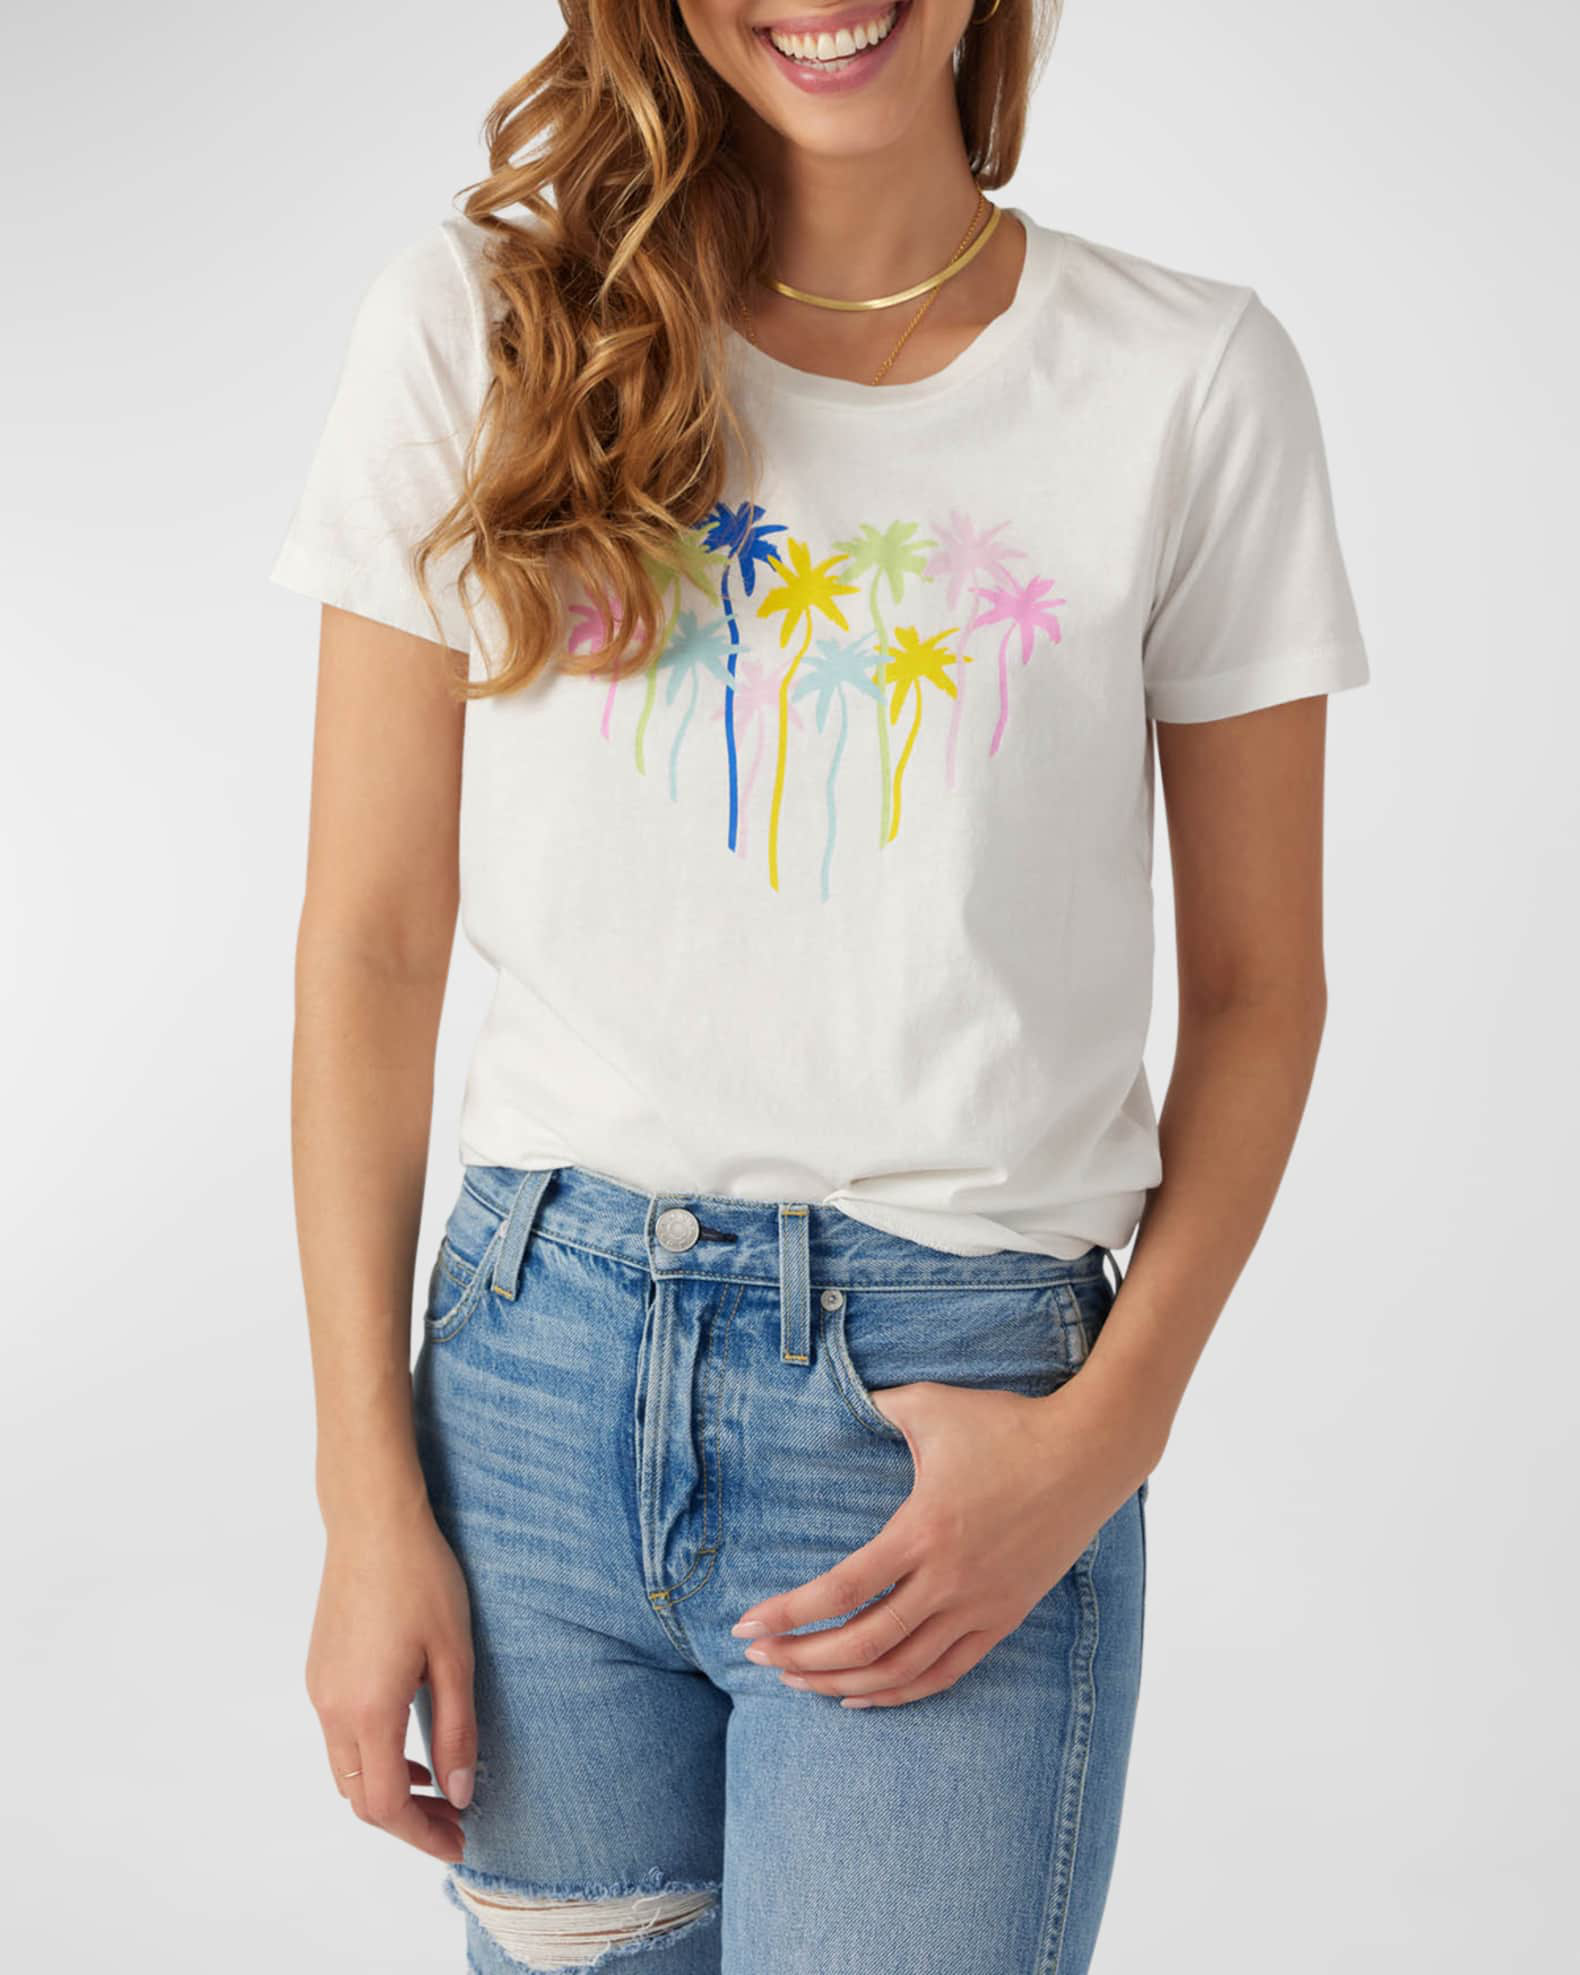 graphic t-shirts for women